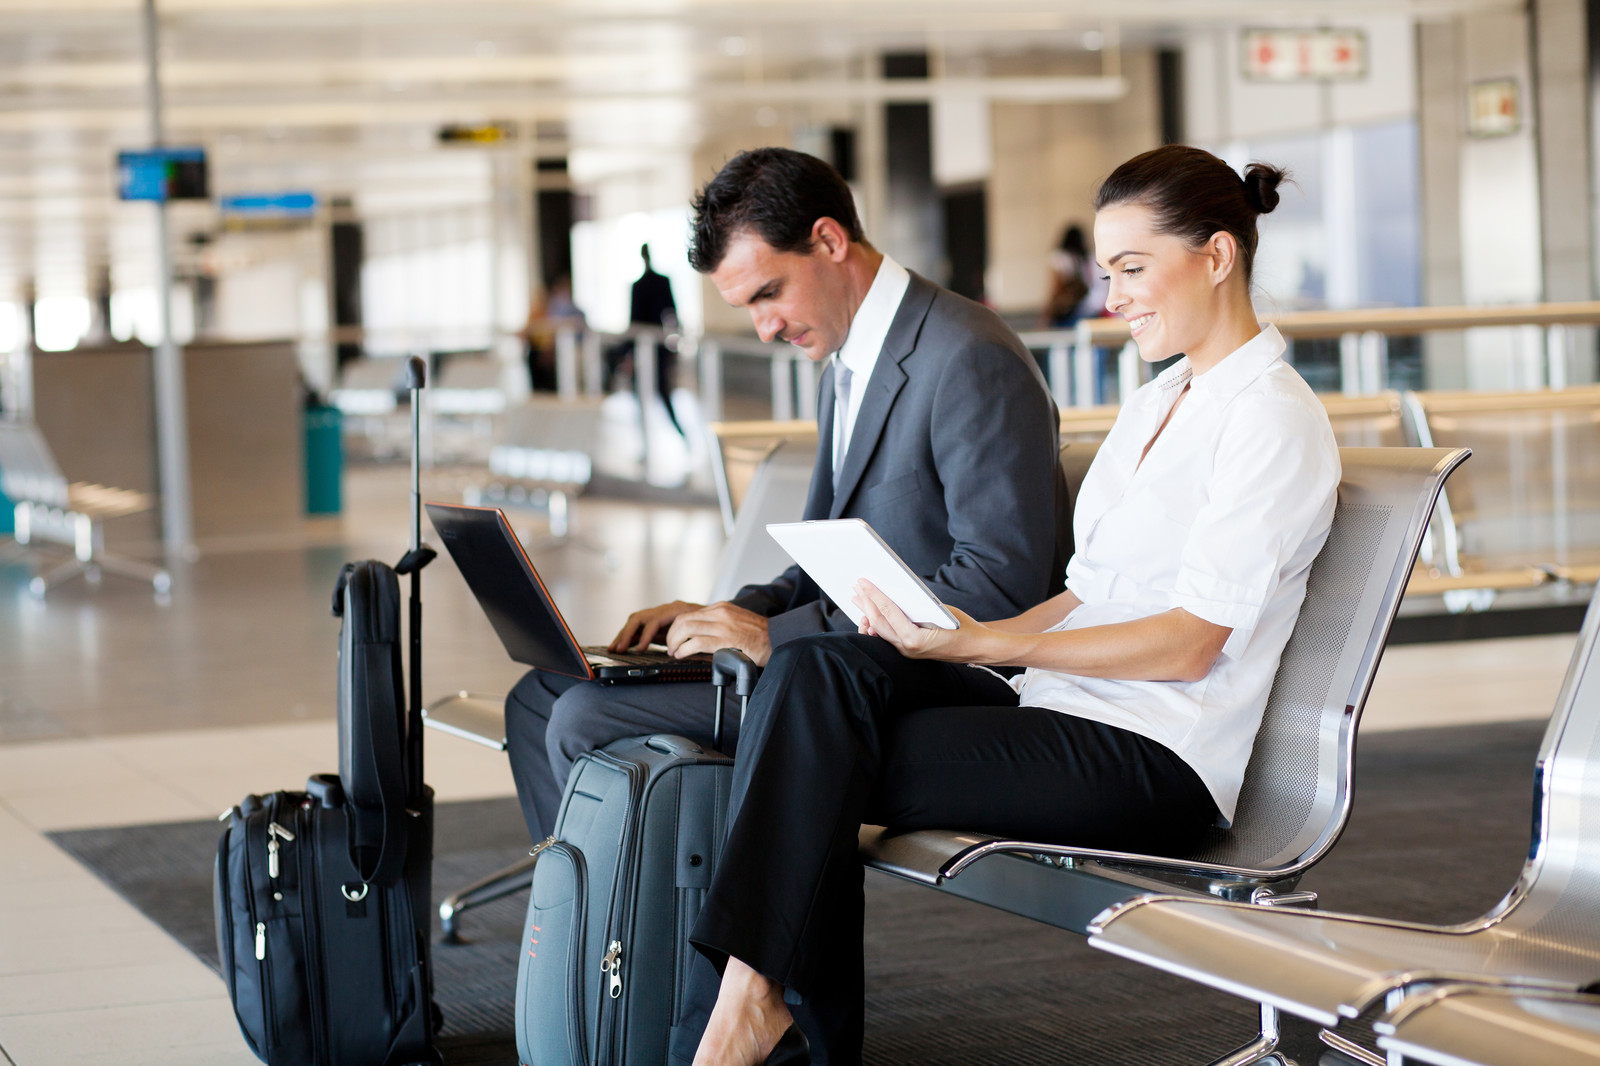 Video: How to protect your Corporate Data while Traveling